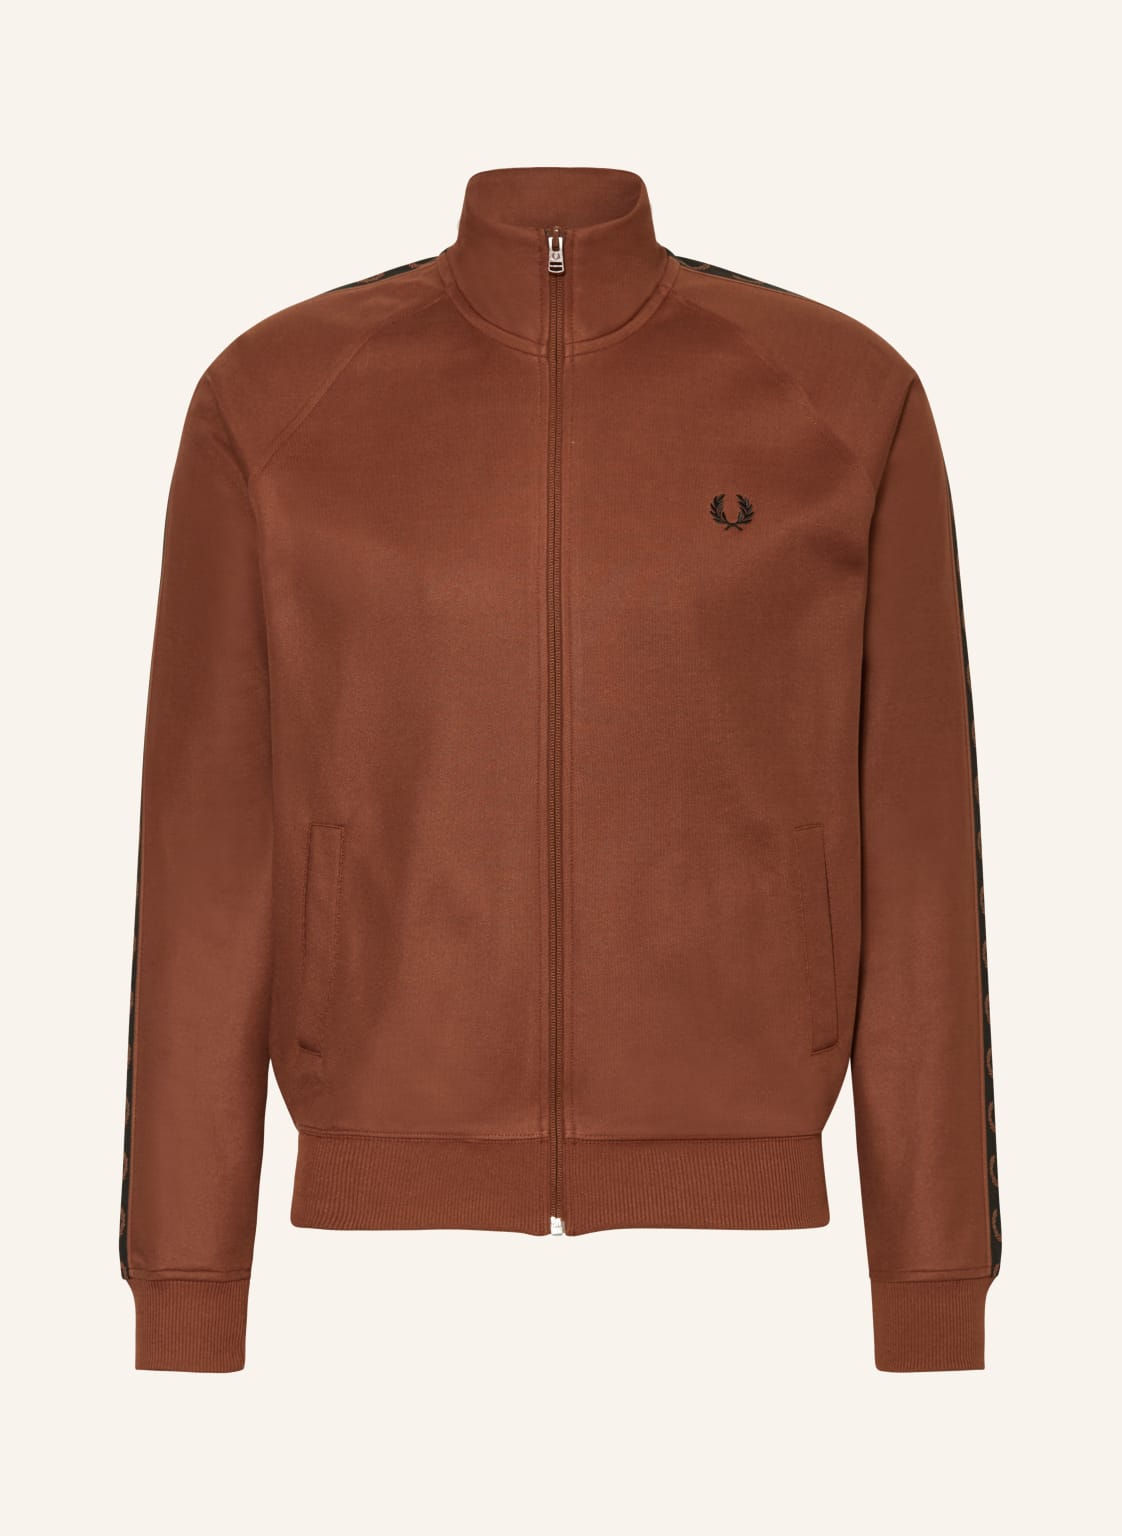 Fred Perry Jacke braun von Fred Perry